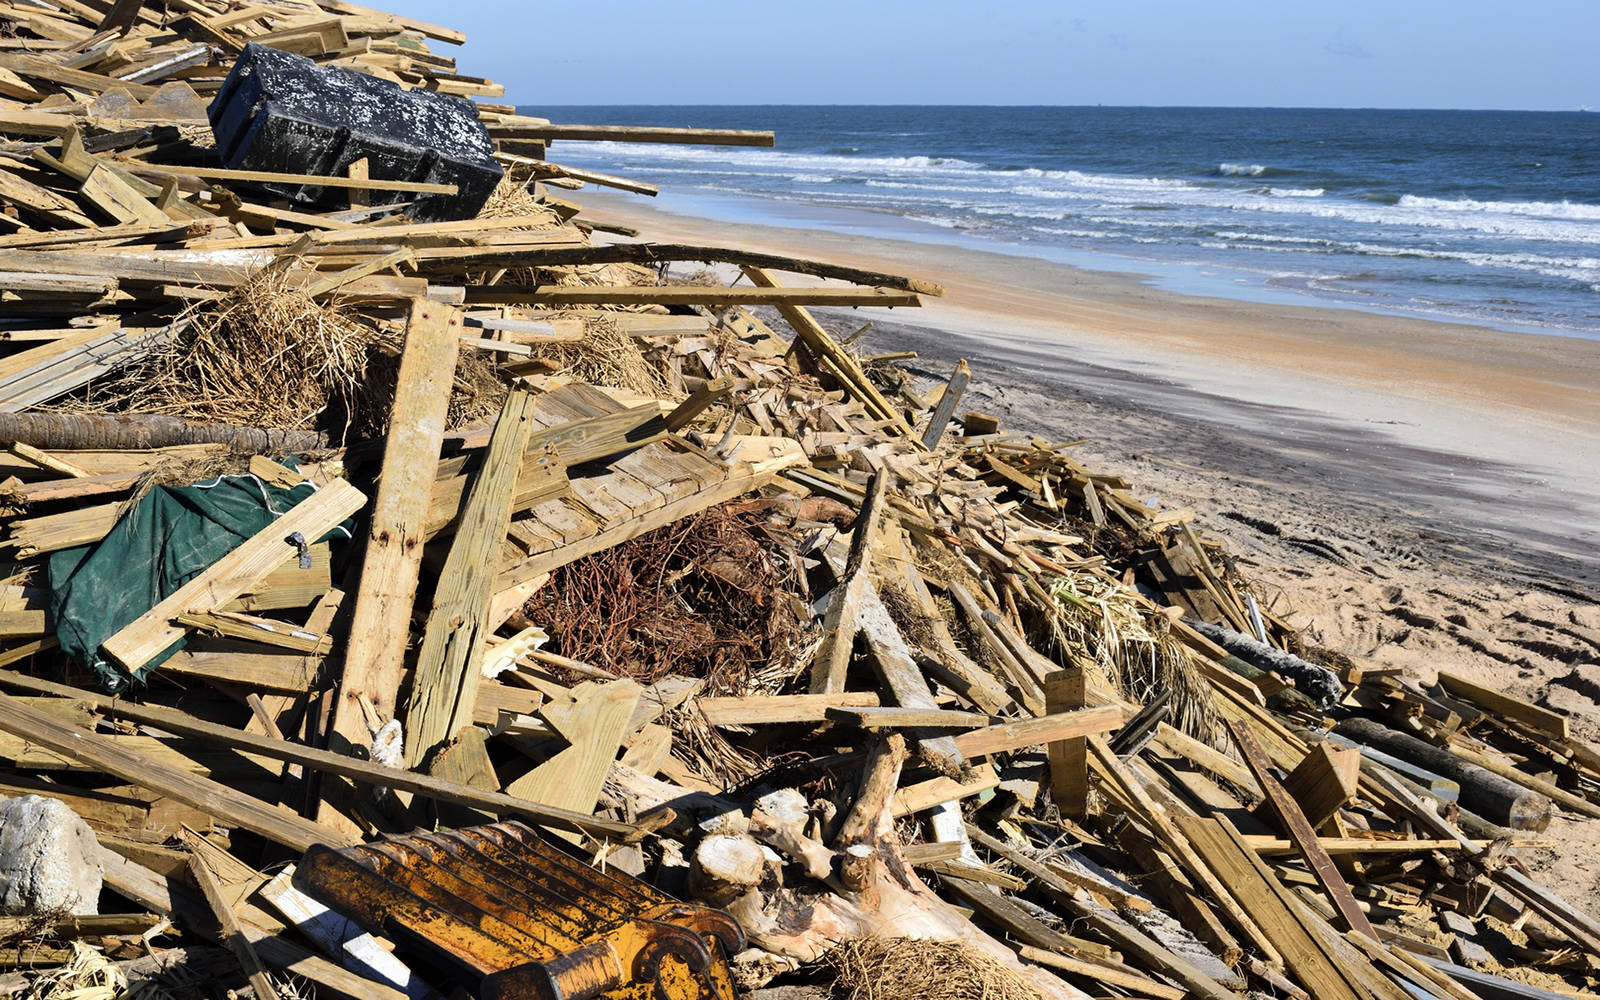 A pile of debris, including wood and trash, on the beach.